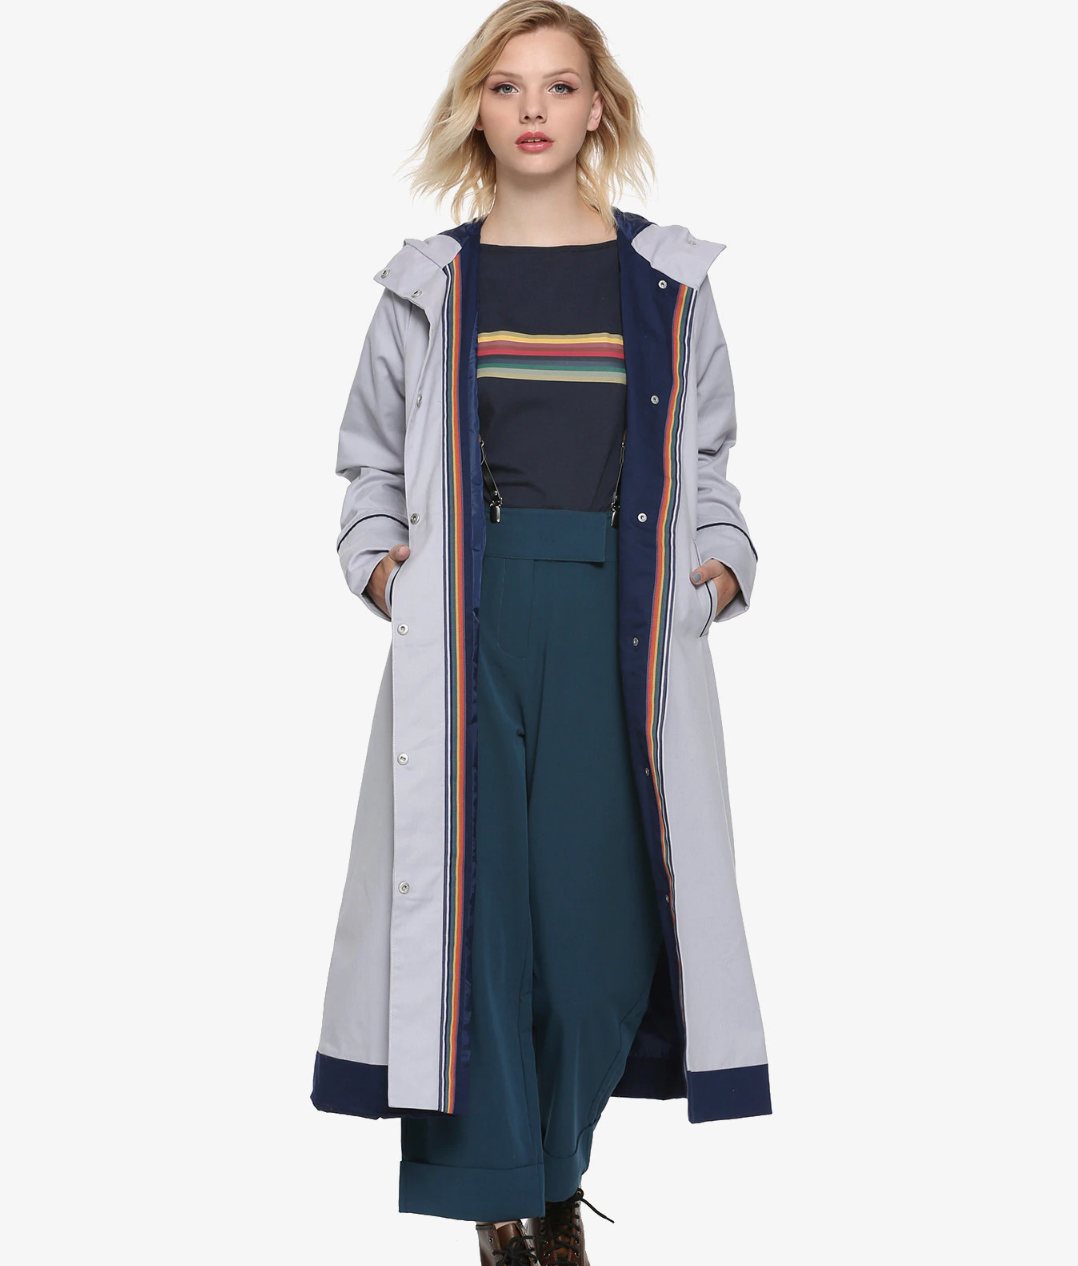 Cosplay as the Thirteenth Doctor with this coat from Her Universe